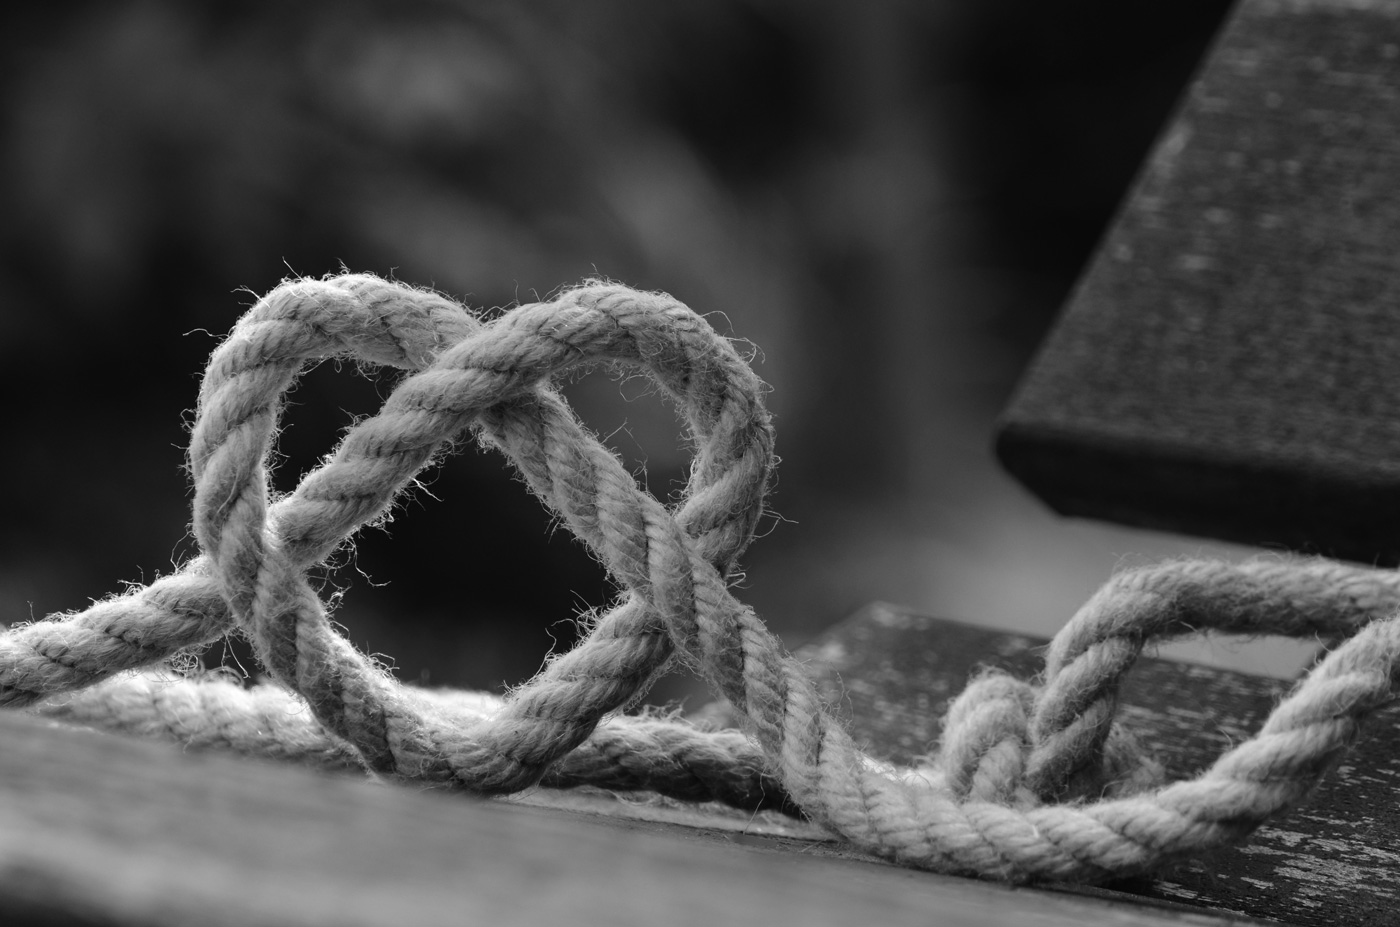 A black and white photograph of a thick rope, whose knot is in the shape of a heart.